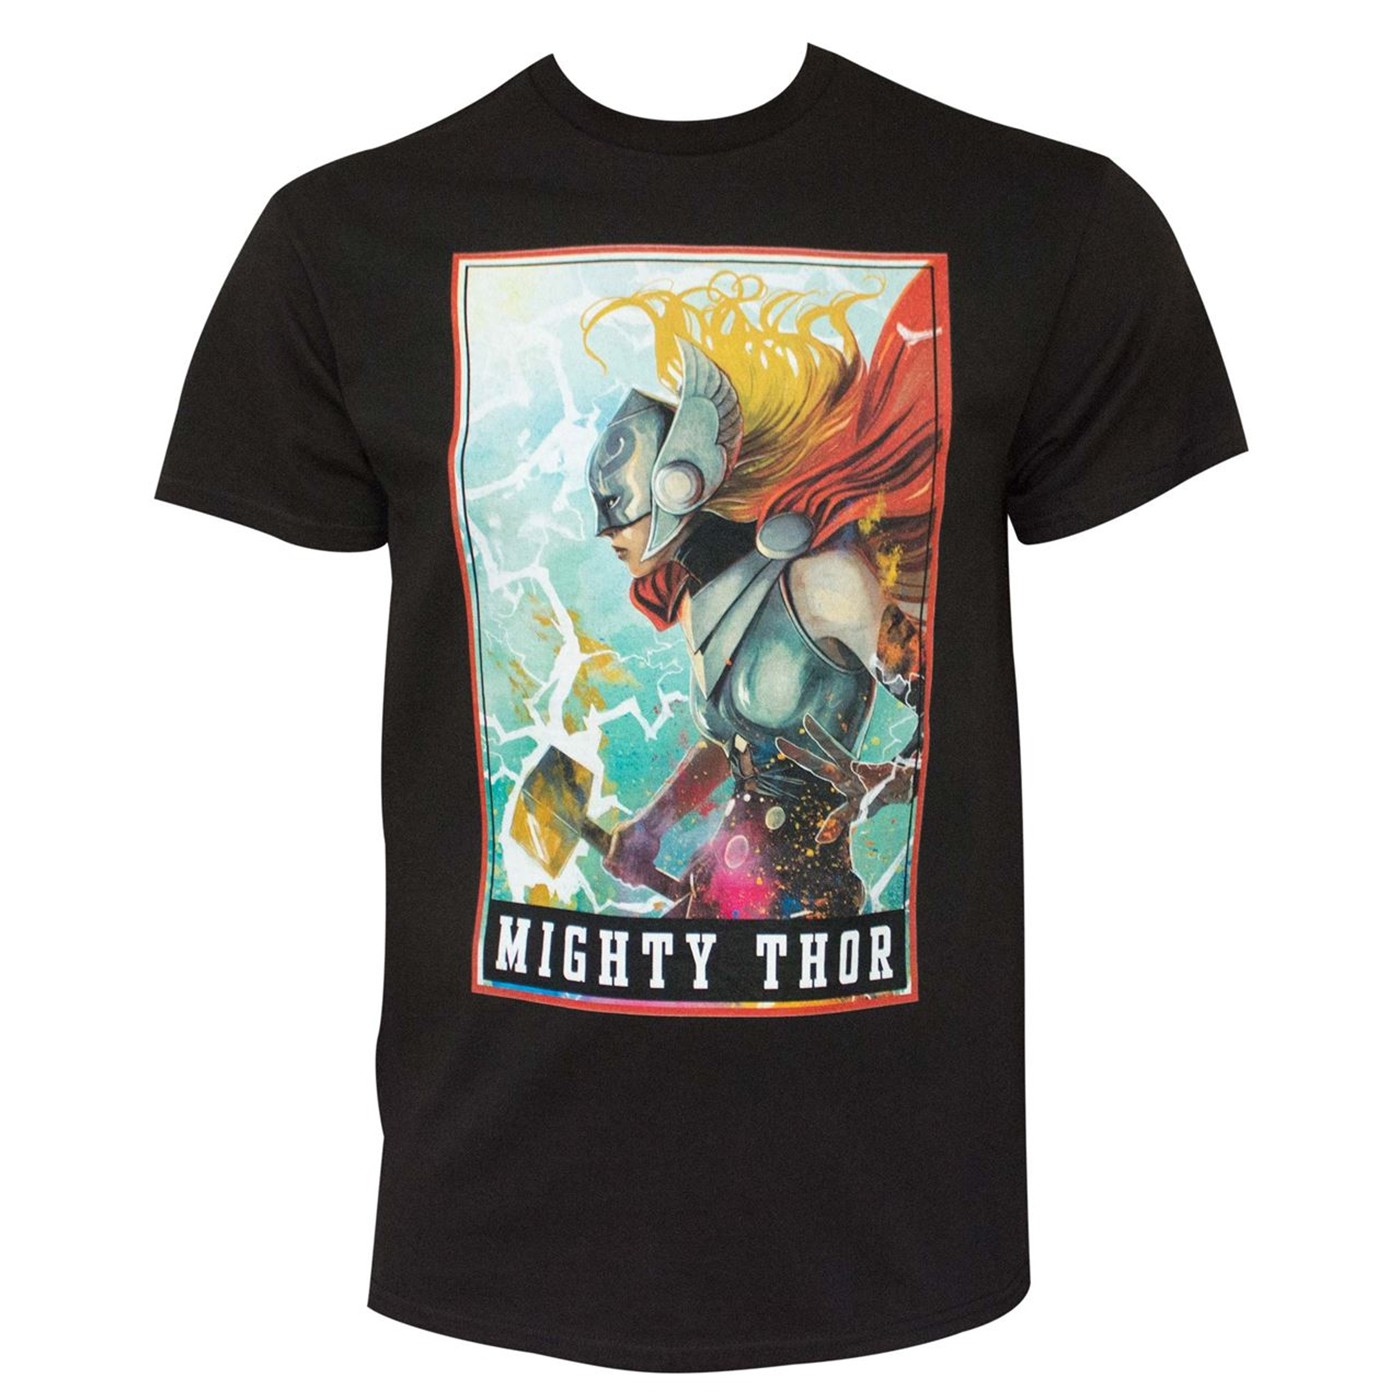 Mighty Thor Jane Foster Men's T-Shirt